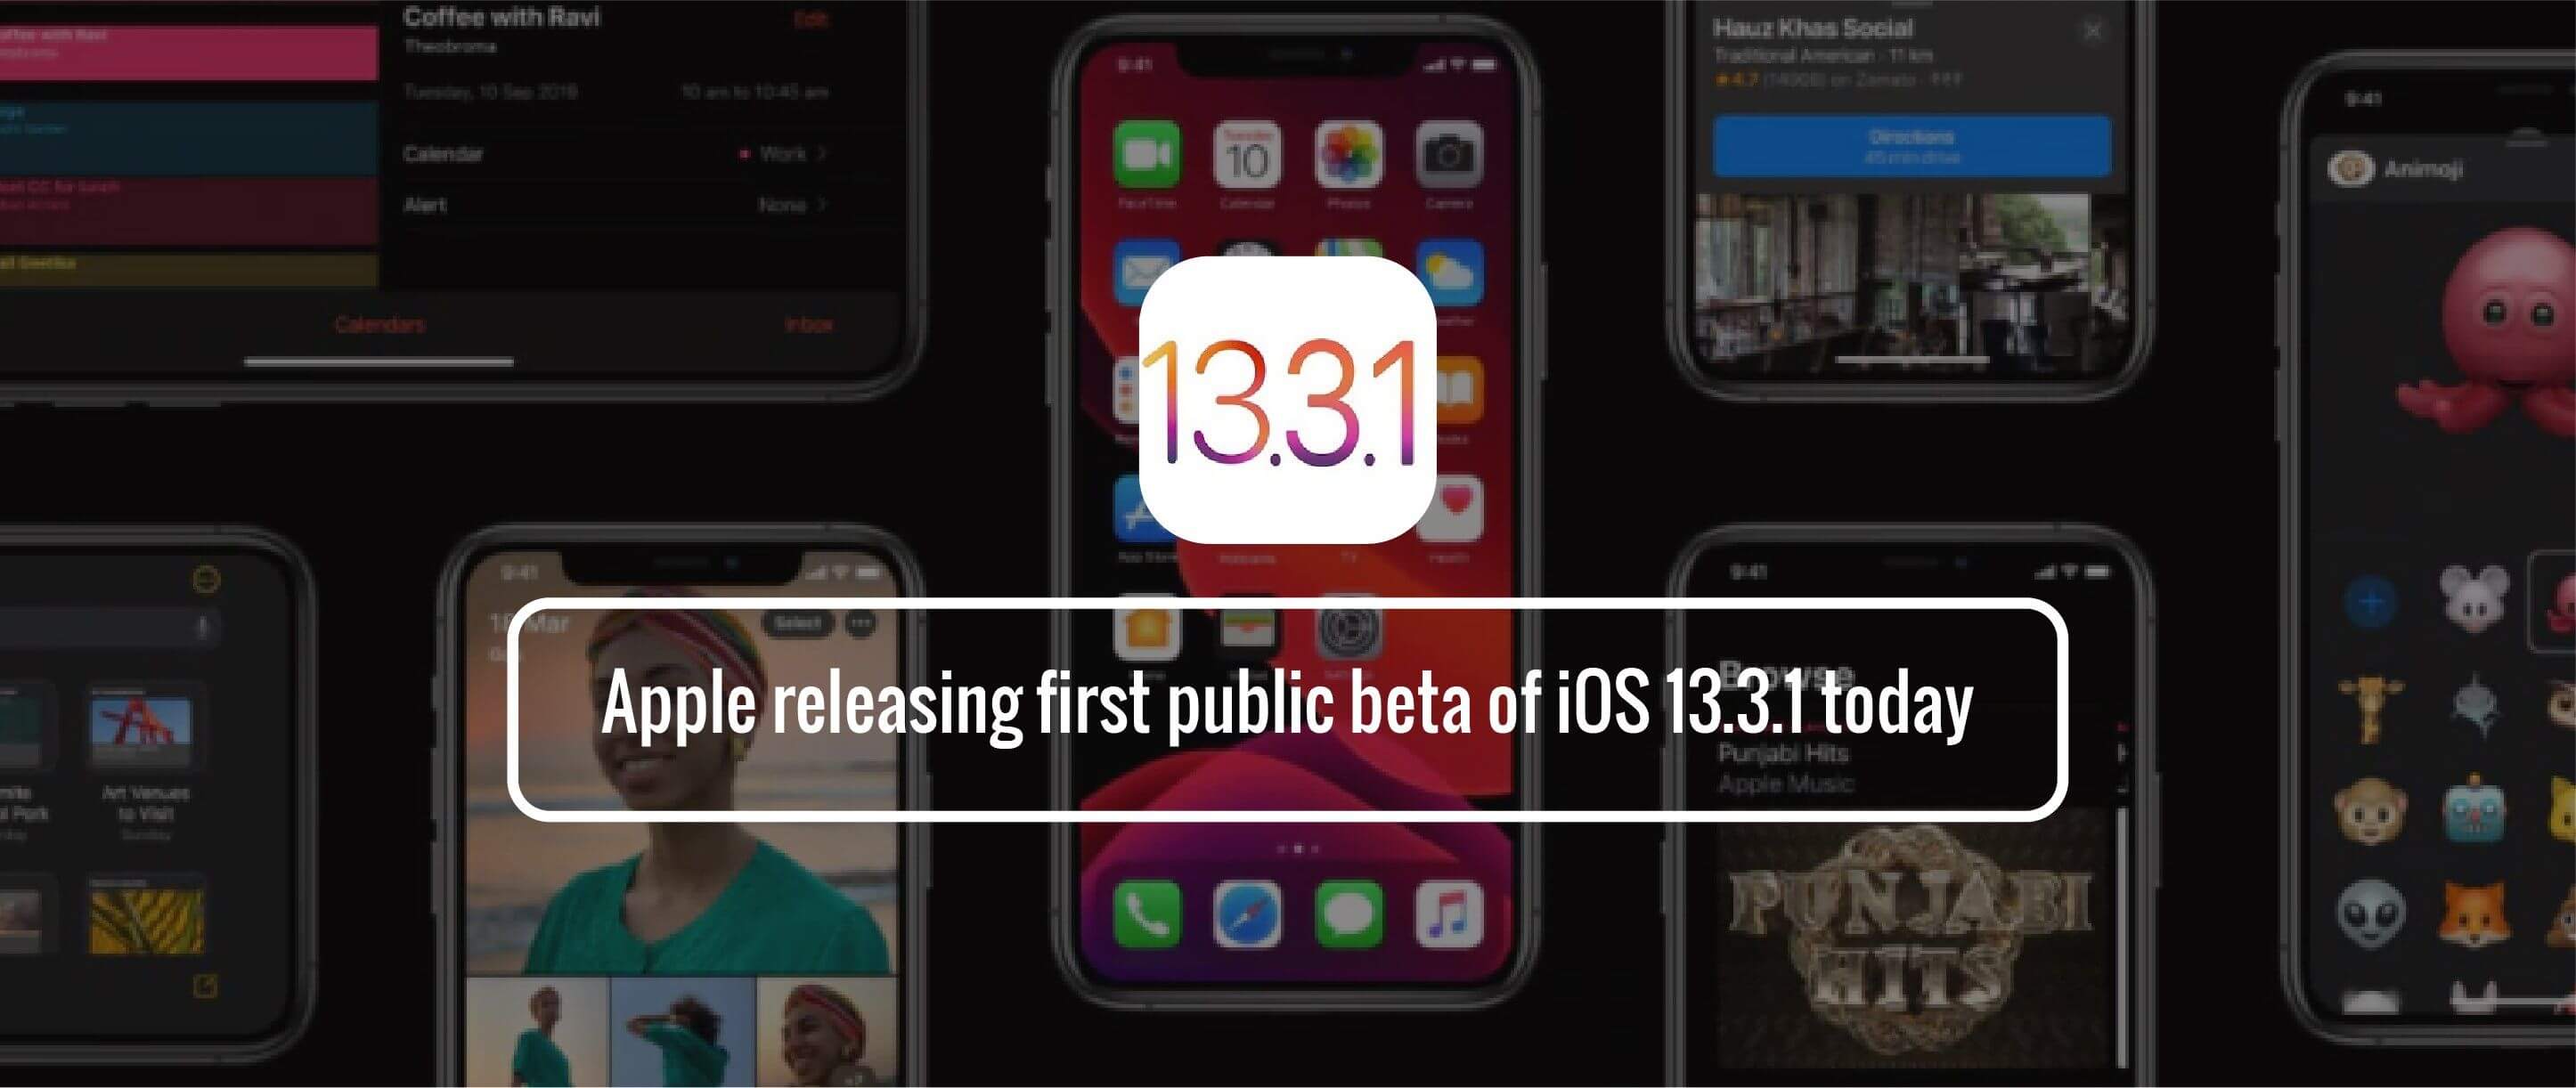 Apple releasing first public beta of iOS 13.3.1 today